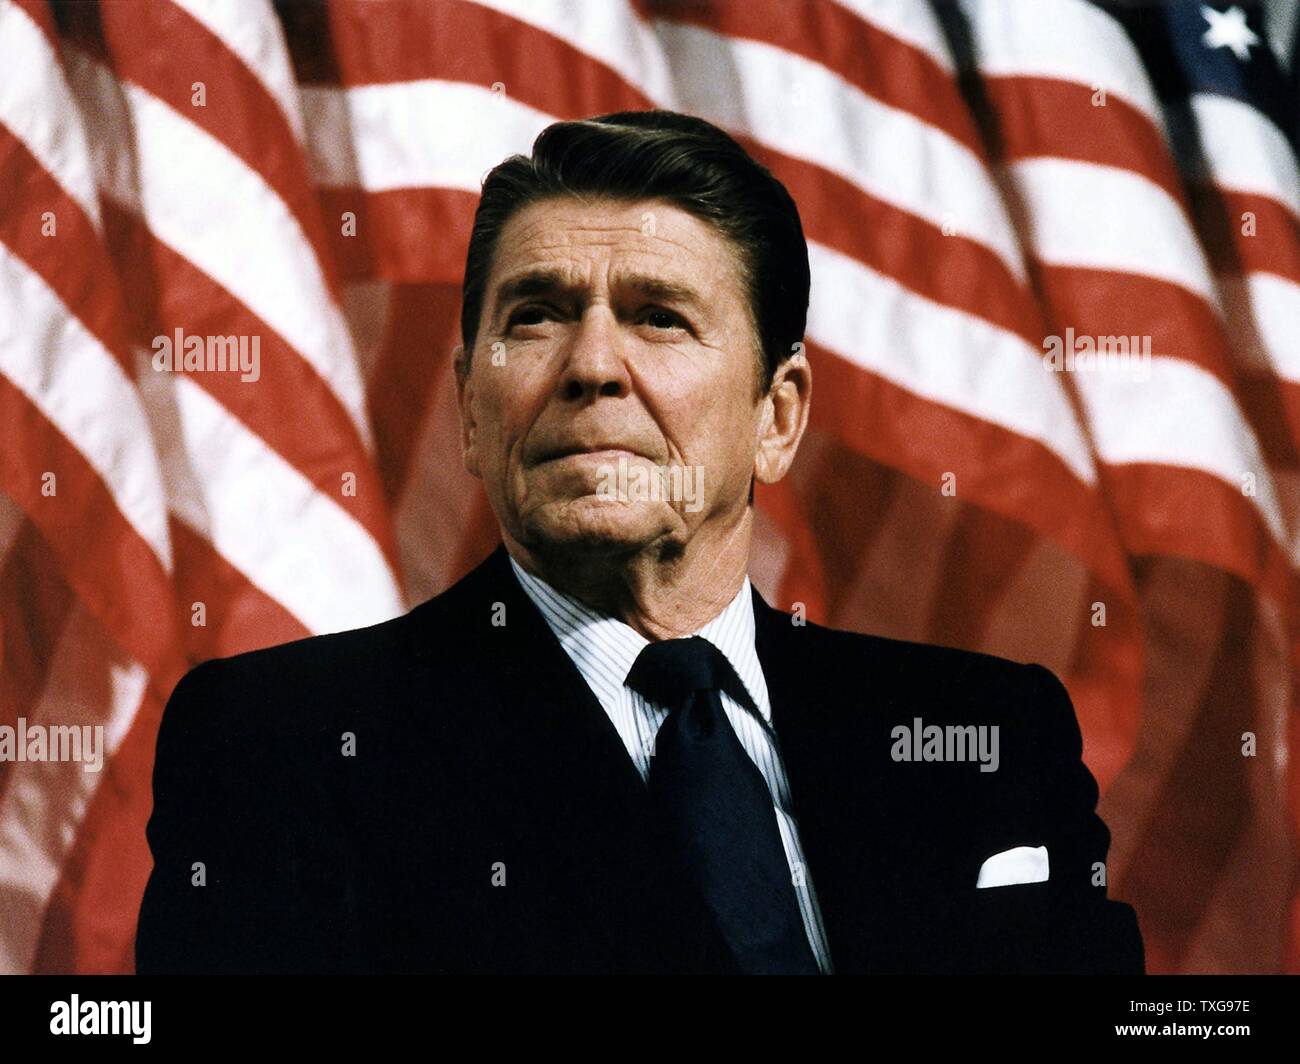 Ronald Wilson Reagan, 40th President of the United States (1981–1989) and 33rd Governor of California (1967–1975) Stock Photo